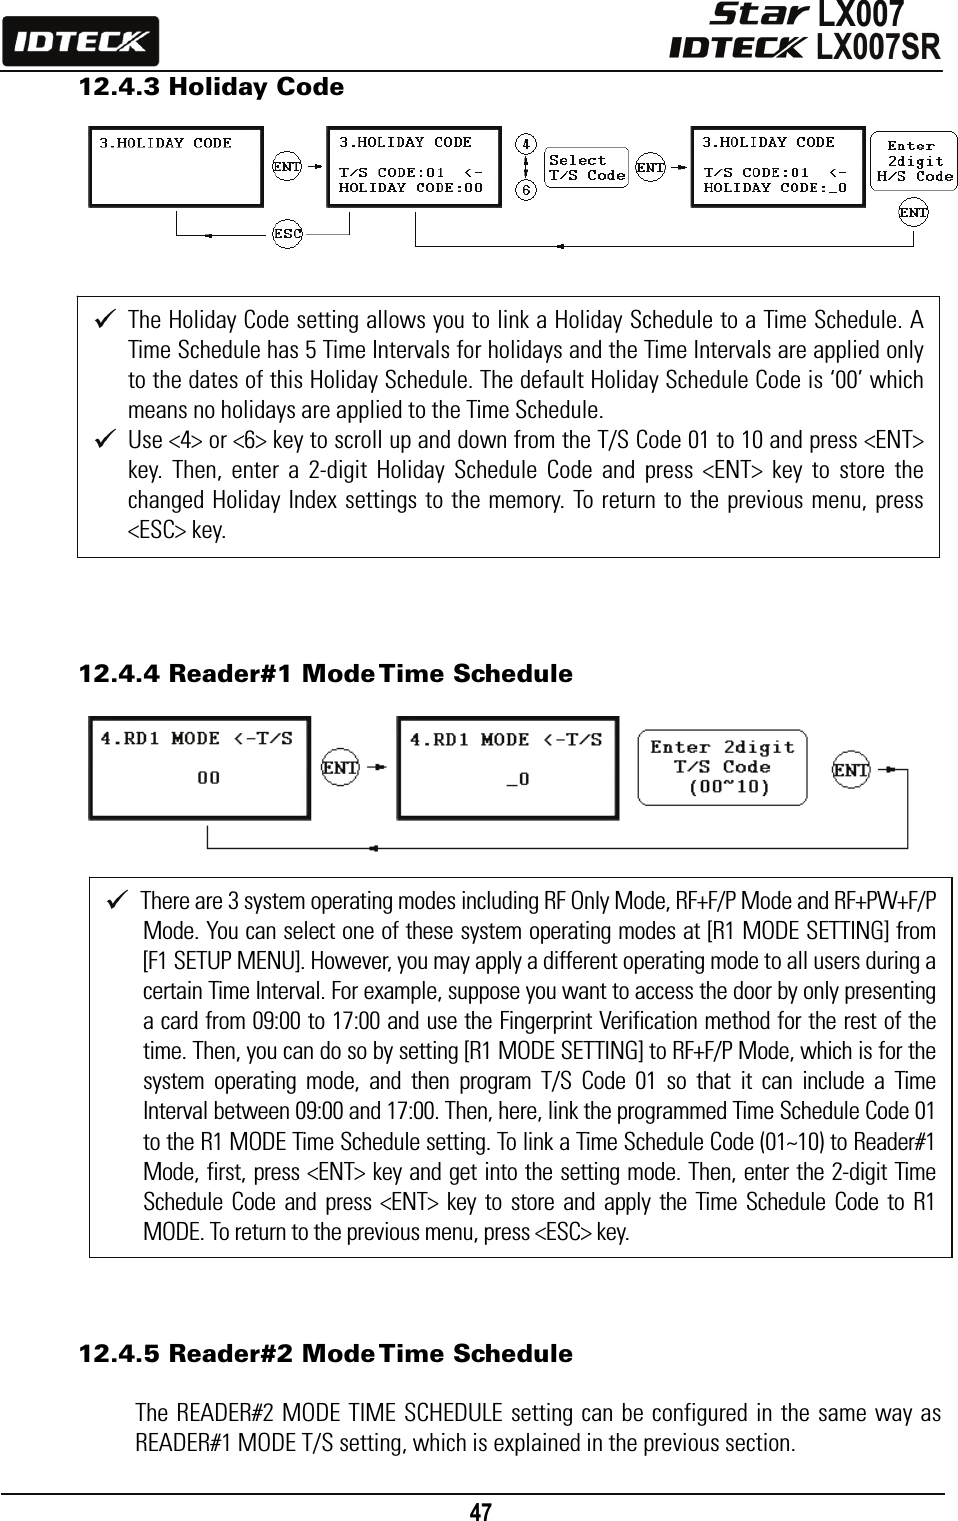                                                                                    47      12.4.3 Holiday Code                    12.4.4 Reader#1 Mode Time Schedule                      12.4.5 Reader#2 Mode Time Schedule  The READER#2 MODE TIME SCHEDULE setting can be configured in the same way as READER#1 MODE T/S setting, which is explained in the previous section.  The Holiday Code setting allows you to link a Holiday Schedule to a Time Schedule. A Time Schedule has 5 Time Intervals for holidays and the Time Intervals are applied only to the dates of this Holiday Schedule. The default Holiday Schedule Code is ‘00’ which means no holidays are applied to the Time Schedule.    Use &lt;4&gt; or &lt;6&gt; key to scroll up and down from the T/S Code 01 to 10 and press &lt;ENT&gt; key. Then, enter a 2-digit Holiday Schedule Code and press &lt;ENT&gt; key to store the changed Holiday Index settings to the memory. To return to the previous menu, press &lt;ESC&gt; key.  There are 3 system operating modes including RF Only Mode, RF+F/P Mode and RF+PW+F/P Mode. You can select one of these system operating modes at [R1 MODE SETTING] from [F1 SETUP MENU]. However, you may apply a different operating mode to all users during a certain Time Interval. For example, suppose you want to access the door by only presenting a card from 09:00 to 17:00 and use the Fingerprint Verification method for the rest of the time. Then, you can do so by setting [R1 MODE SETTING] to RF+F/P Mode, which is for the system operating mode, and then program T/S Code 01 so that it can include a Time Interval between 09:00 and 17:00. Then, here, link the programmed Time Schedule Code 01 to the R1 MODE Time Schedule setting. To link a Time Schedule Code (01~10) to Reader#1 Mode, first, press &lt;ENT&gt; key and get into the setting mode. Then, enter the 2-digit Time Schedule Code and press &lt;ENT&gt; key to store and apply the Time Schedule Code to R1 MODE. To return to the previous menu, press &lt;ESC&gt; key. 